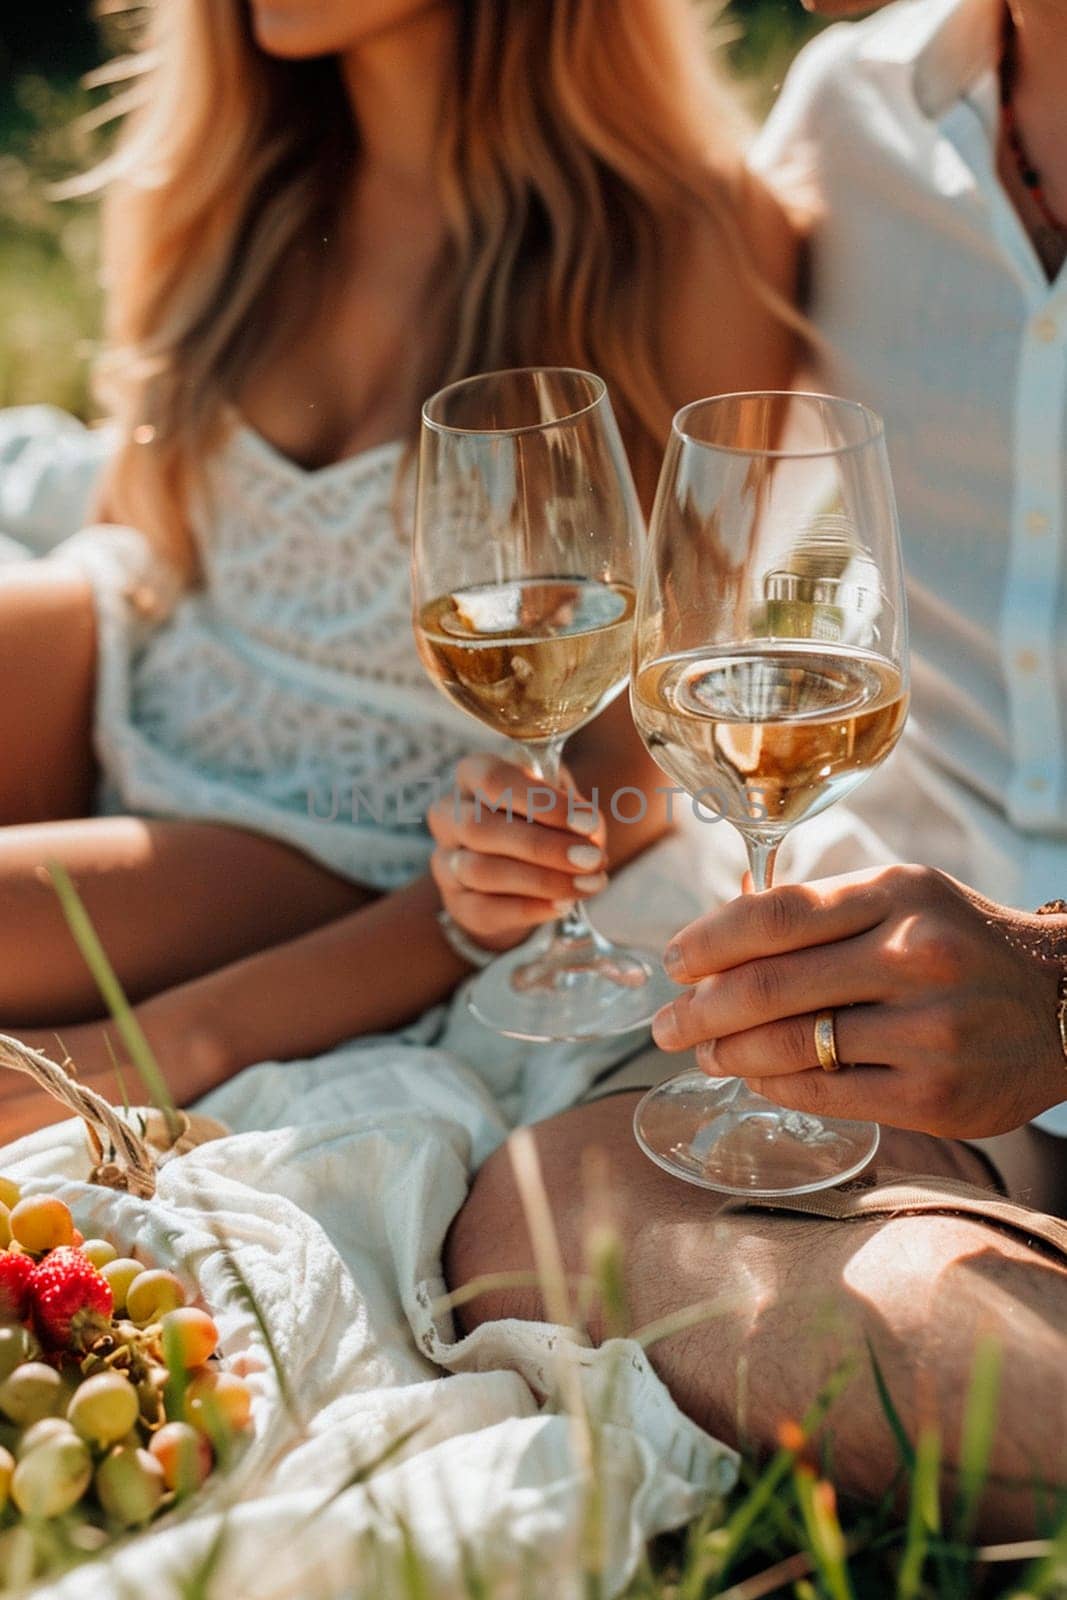 couple in love on a picnic with wine. Selective focus. by yanadjana